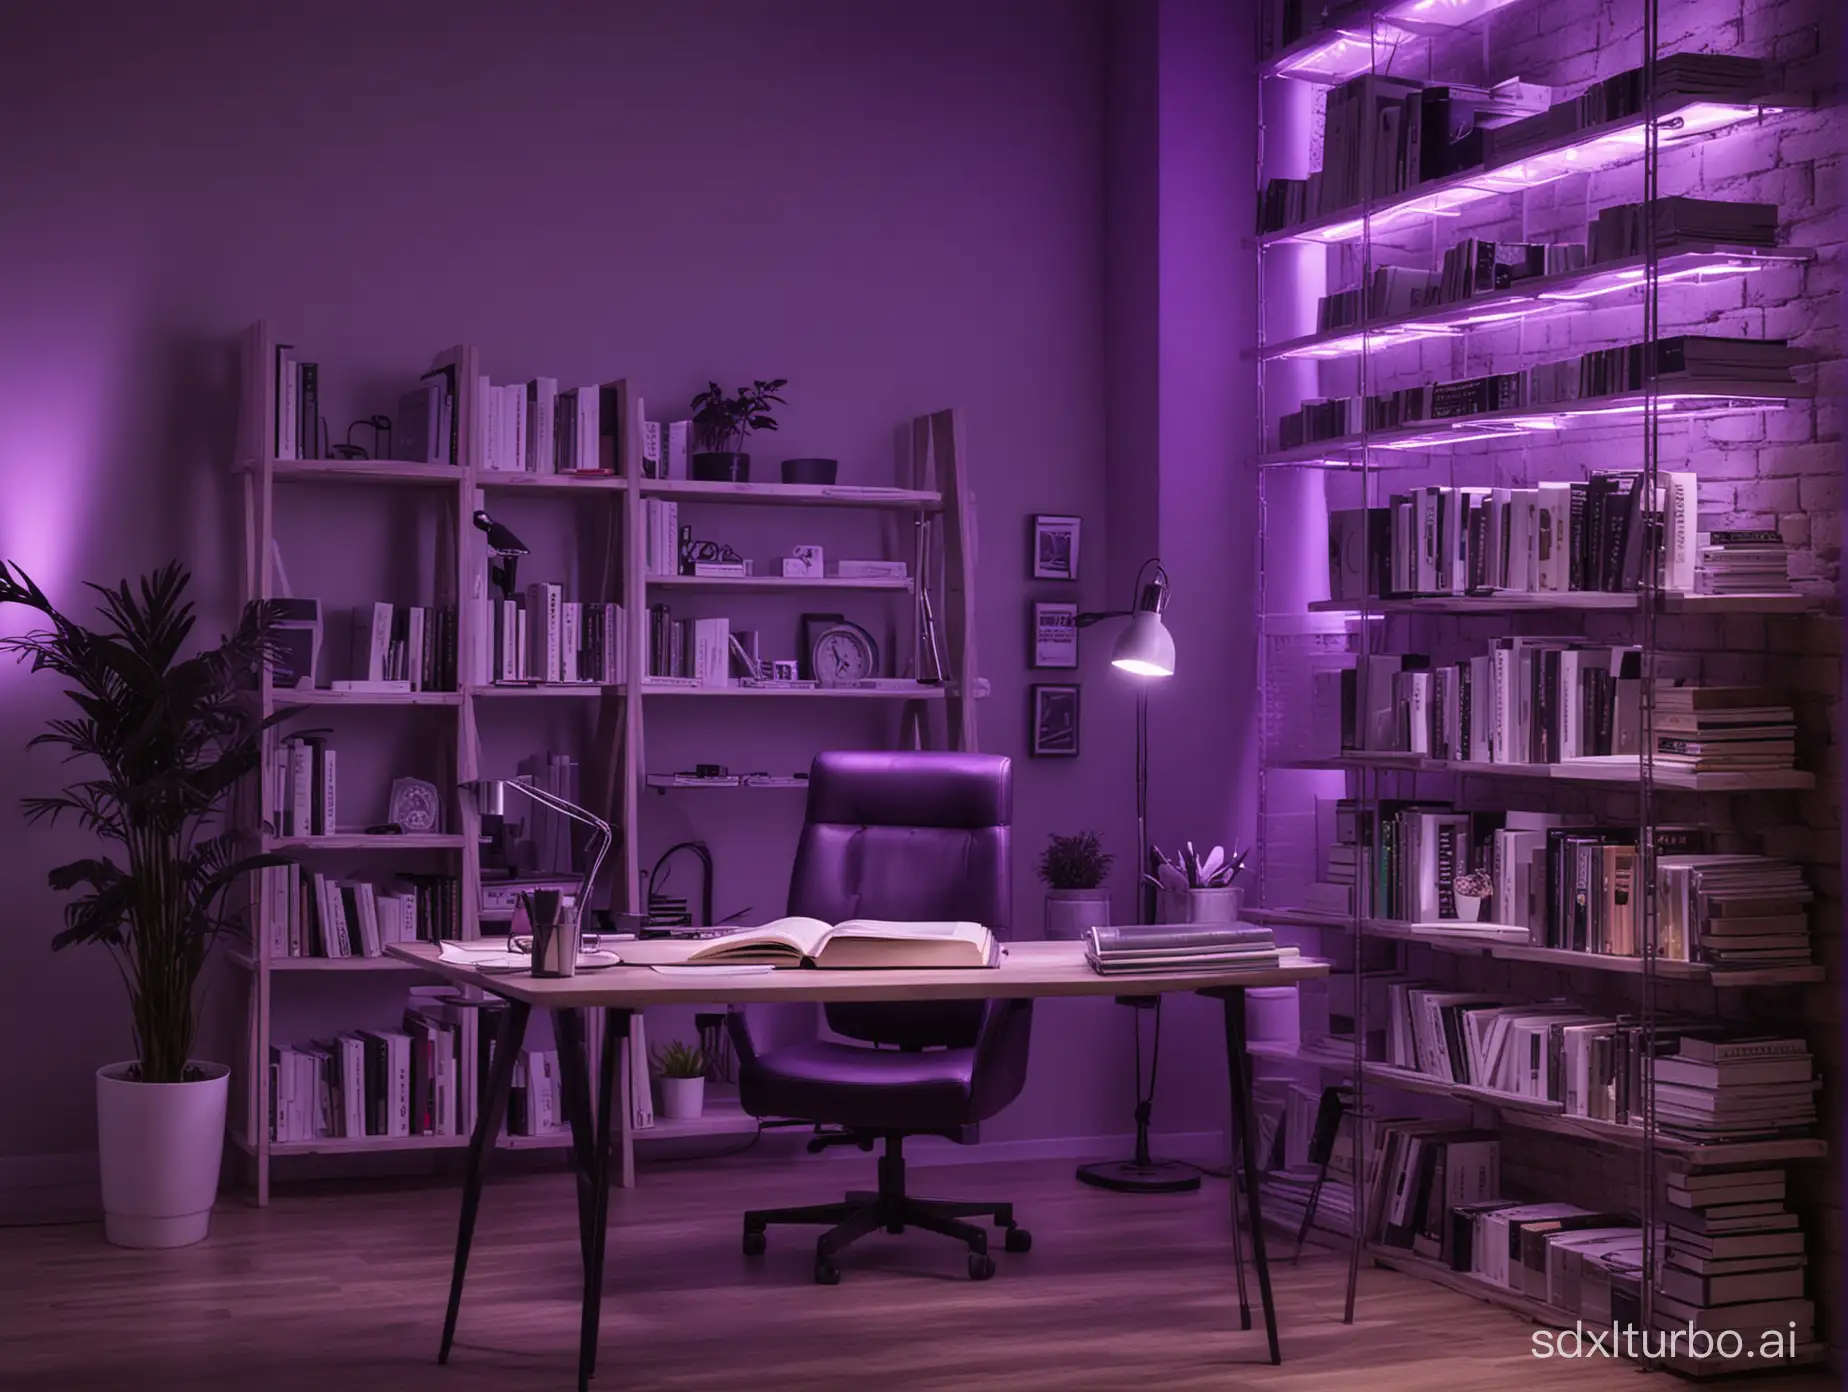 create an office background with books and cool purple ligthing